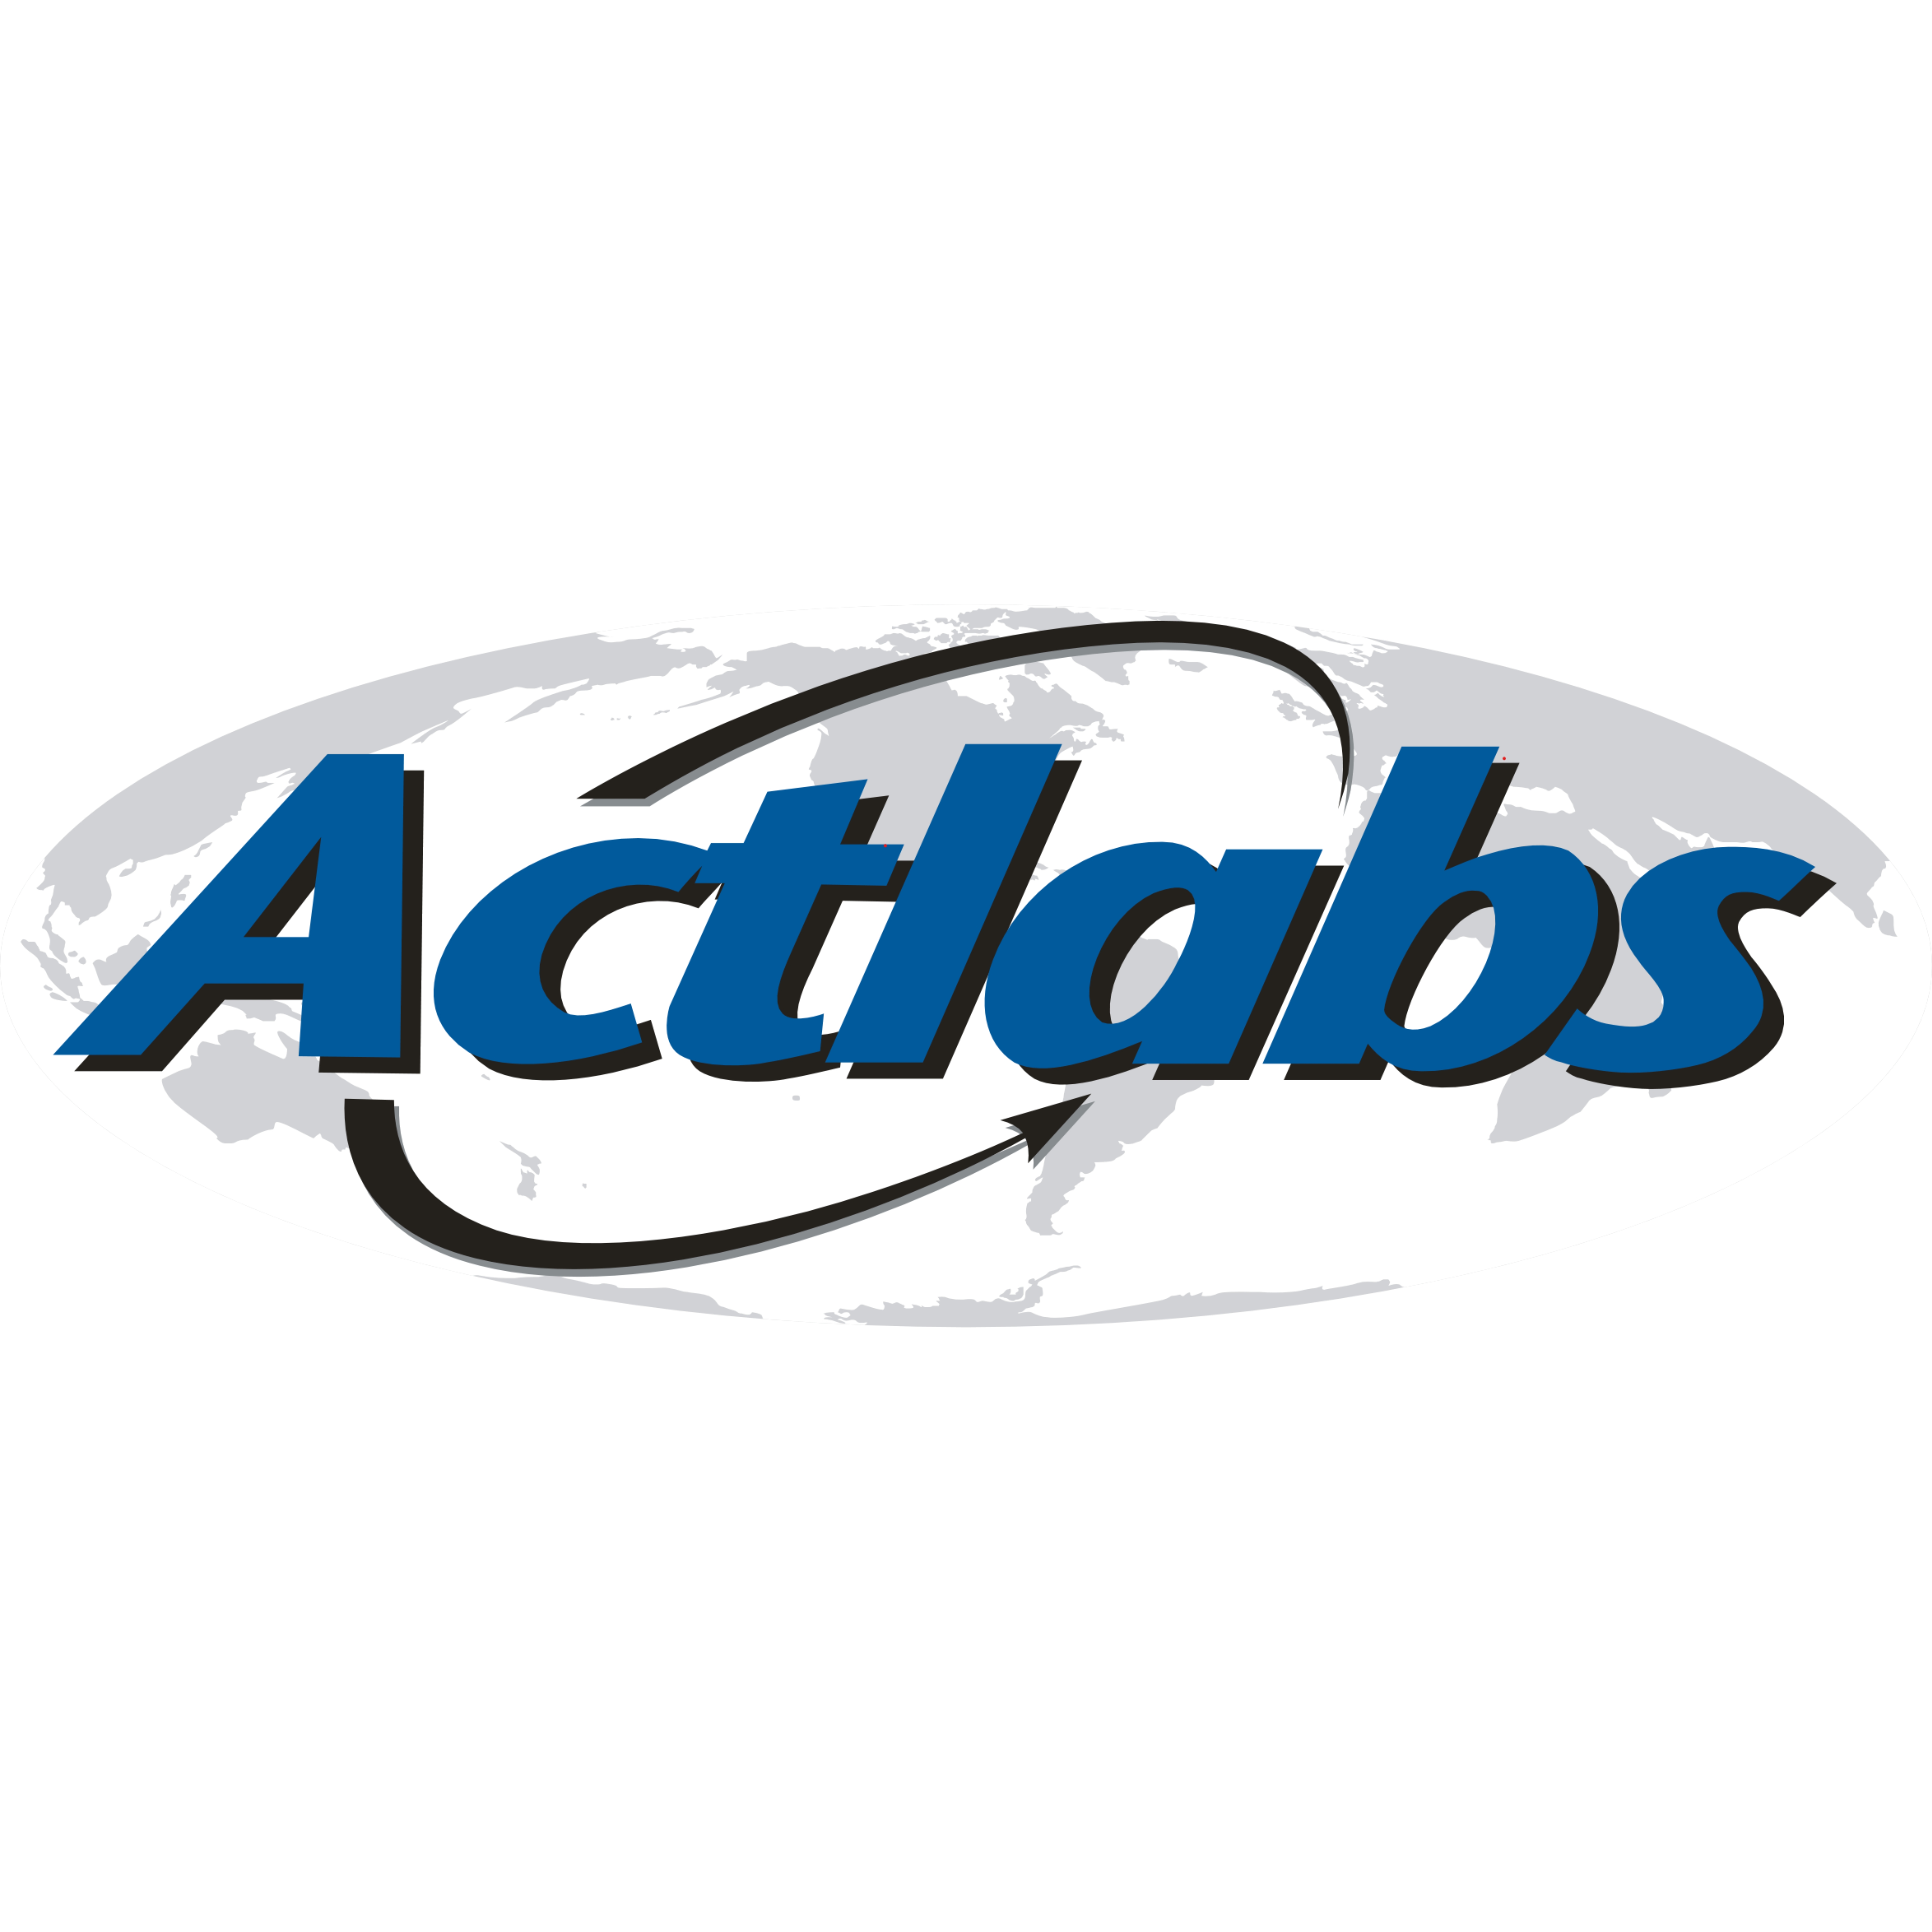 Activation Laboratories Ltd. - The Actlabs Group of Companies provides contract analytical services covering all aspects of analysi